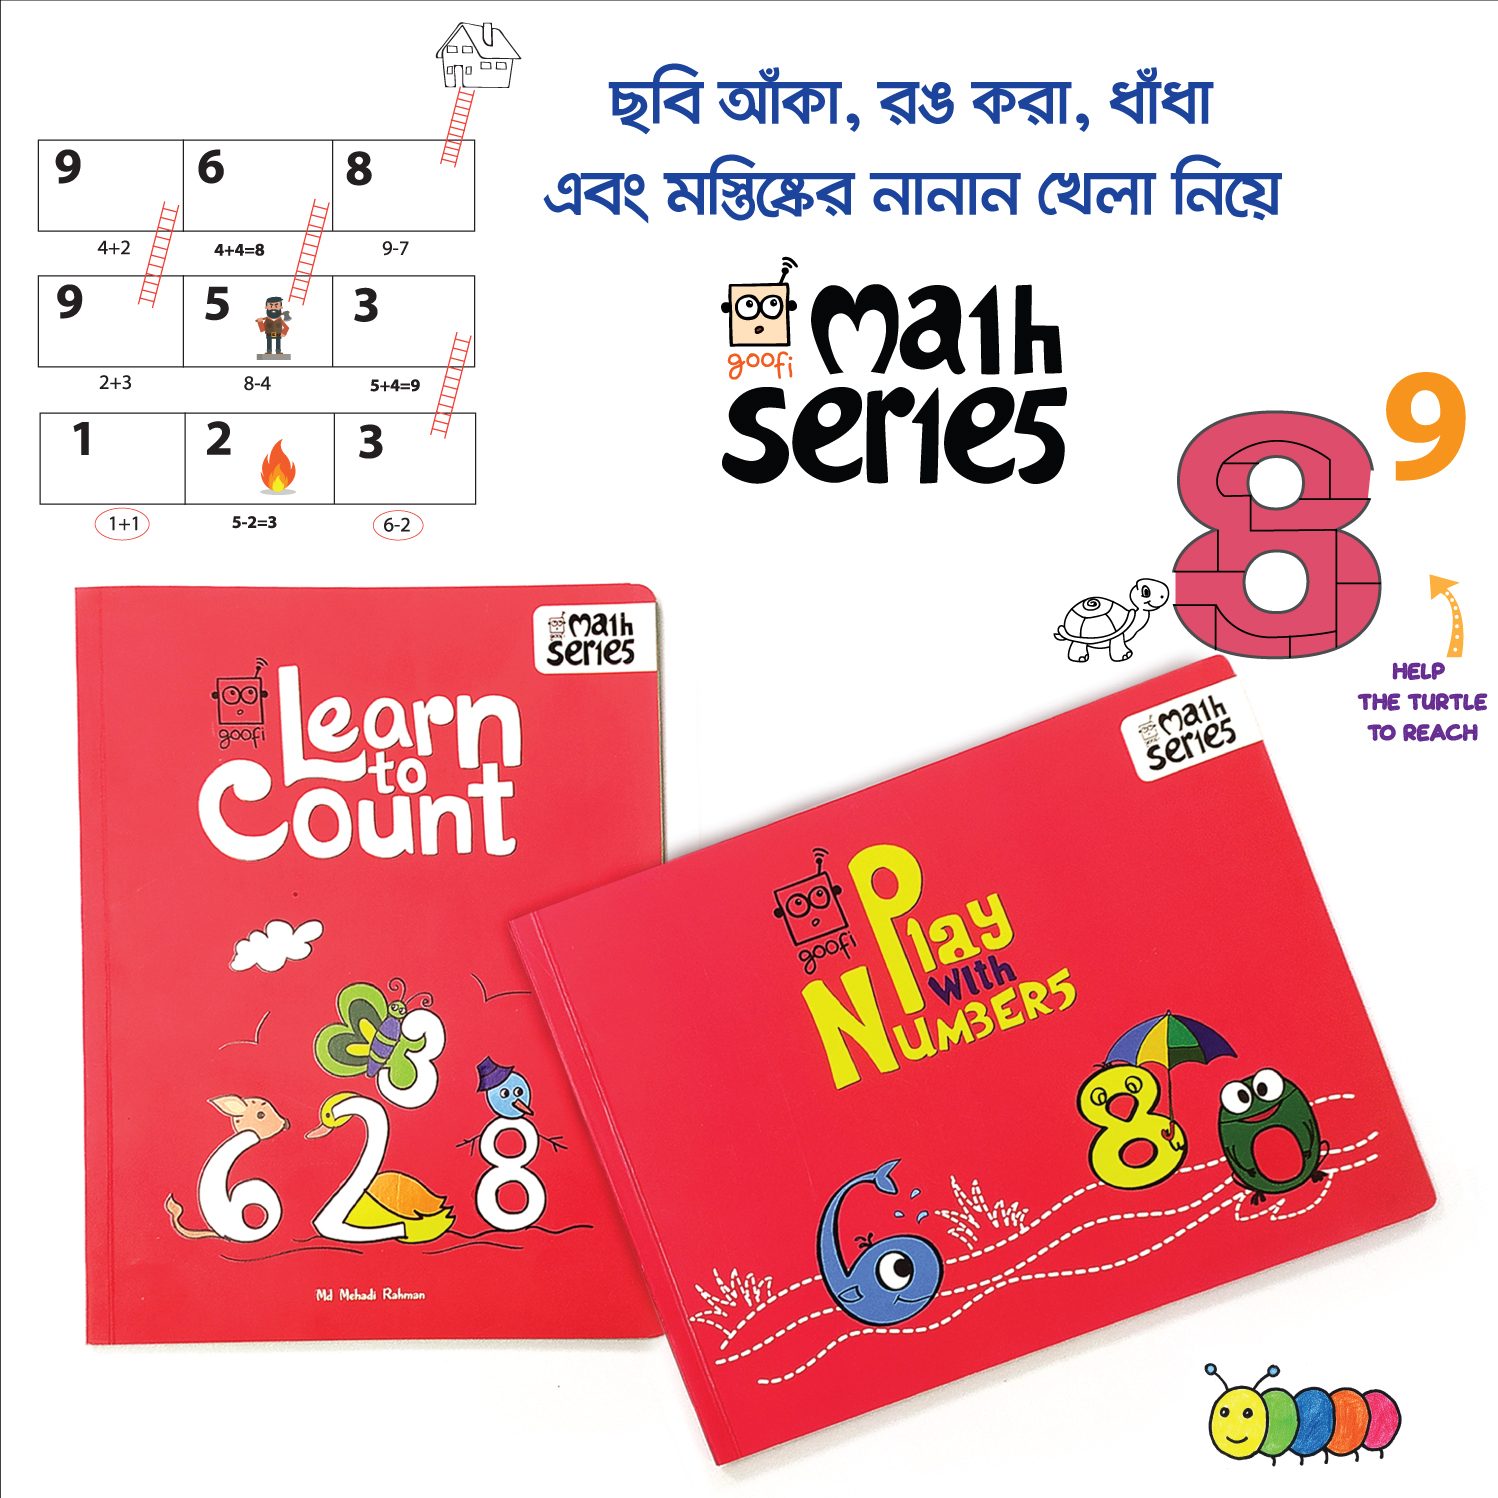 Kids Time - Math Series Promotion